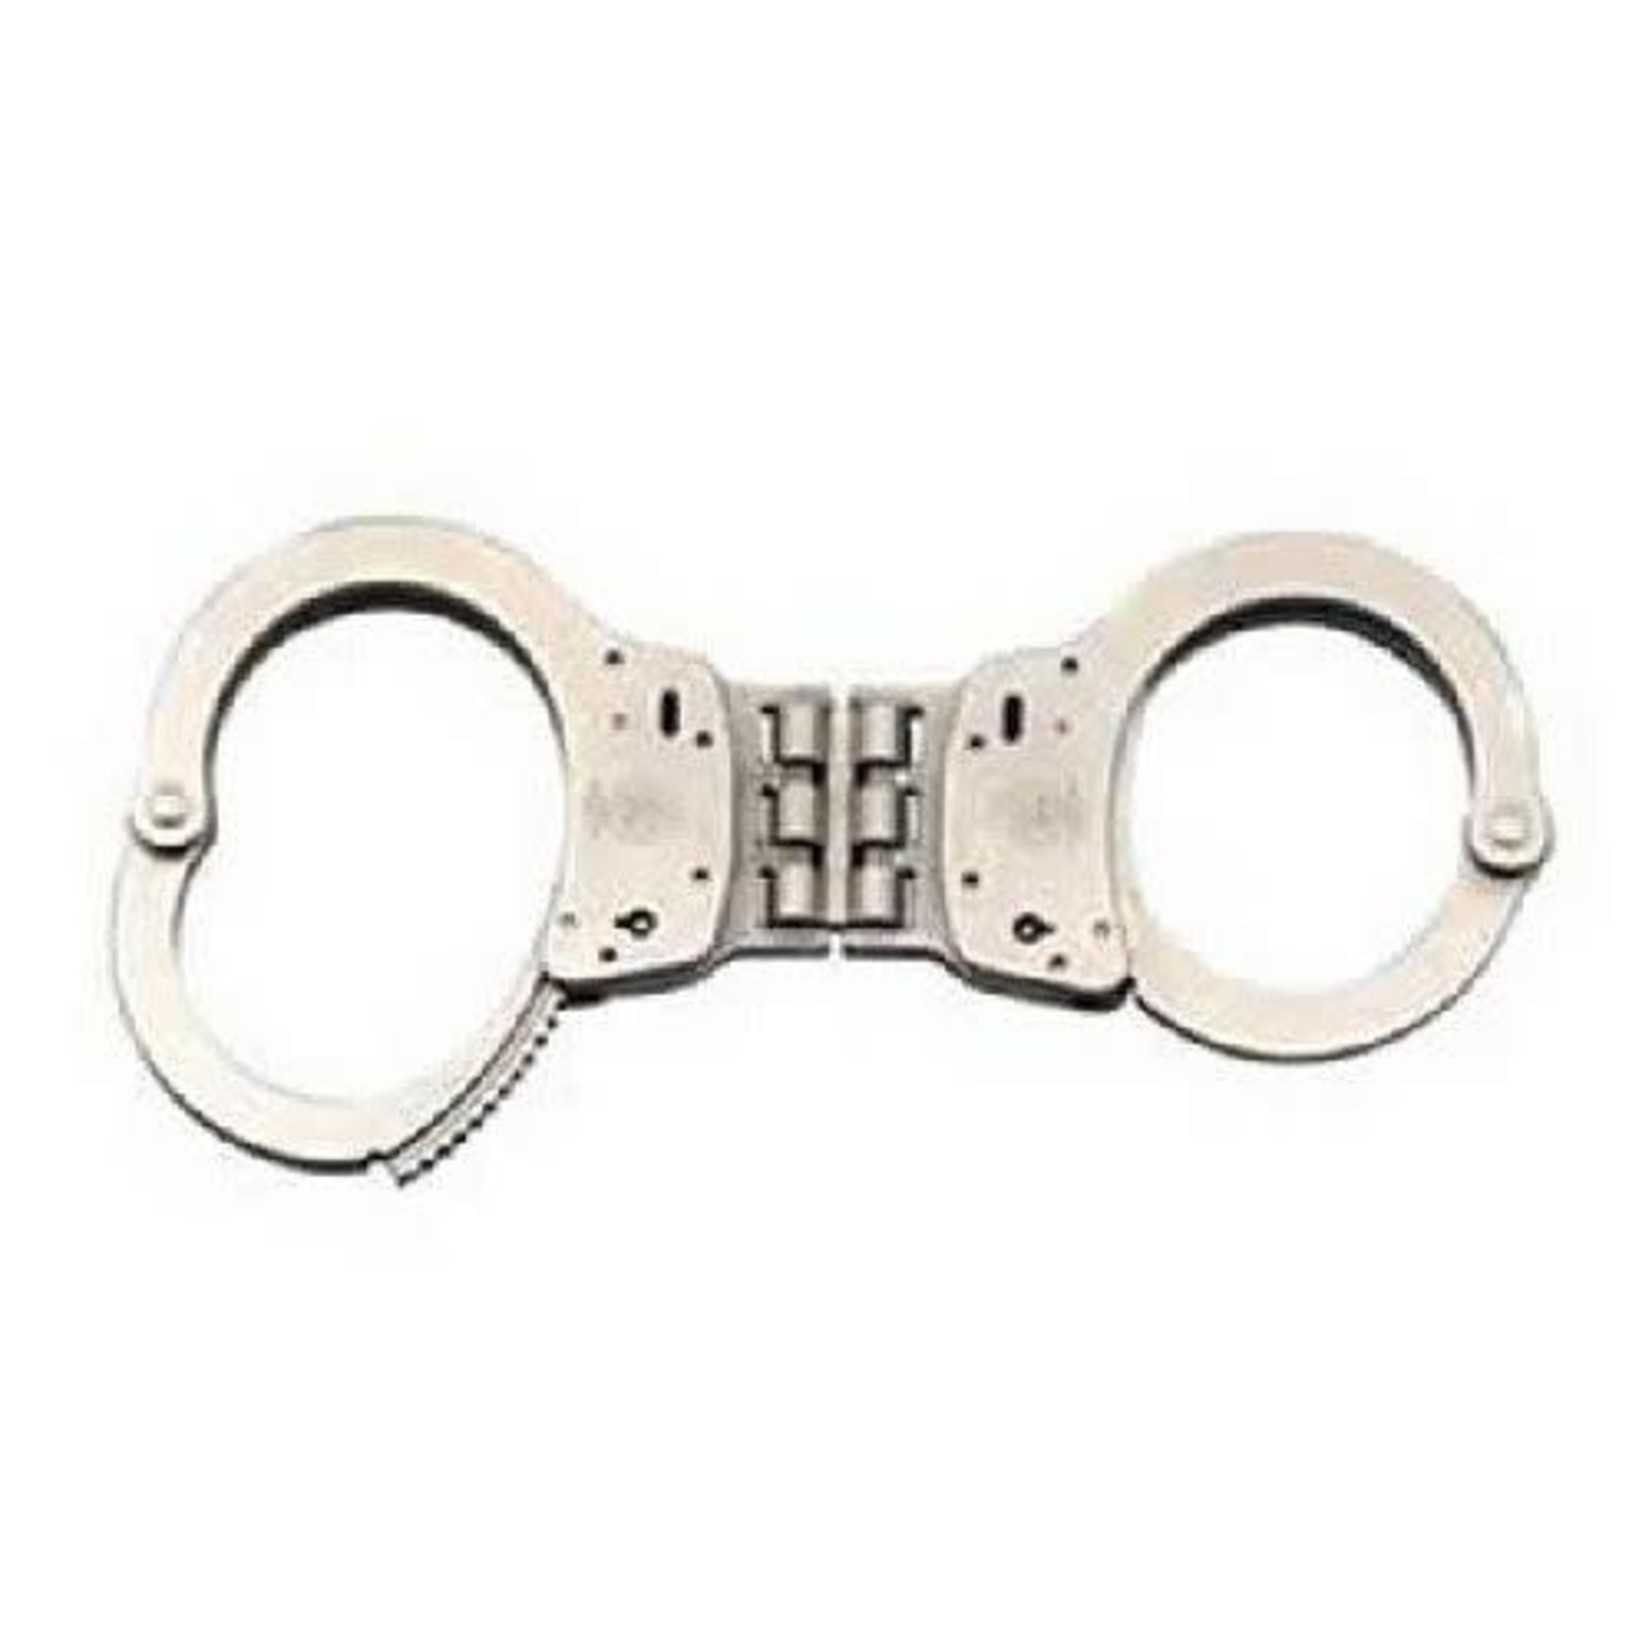 Smith & Wesson Smith & Wesson Handcuffs - 300 Nickel